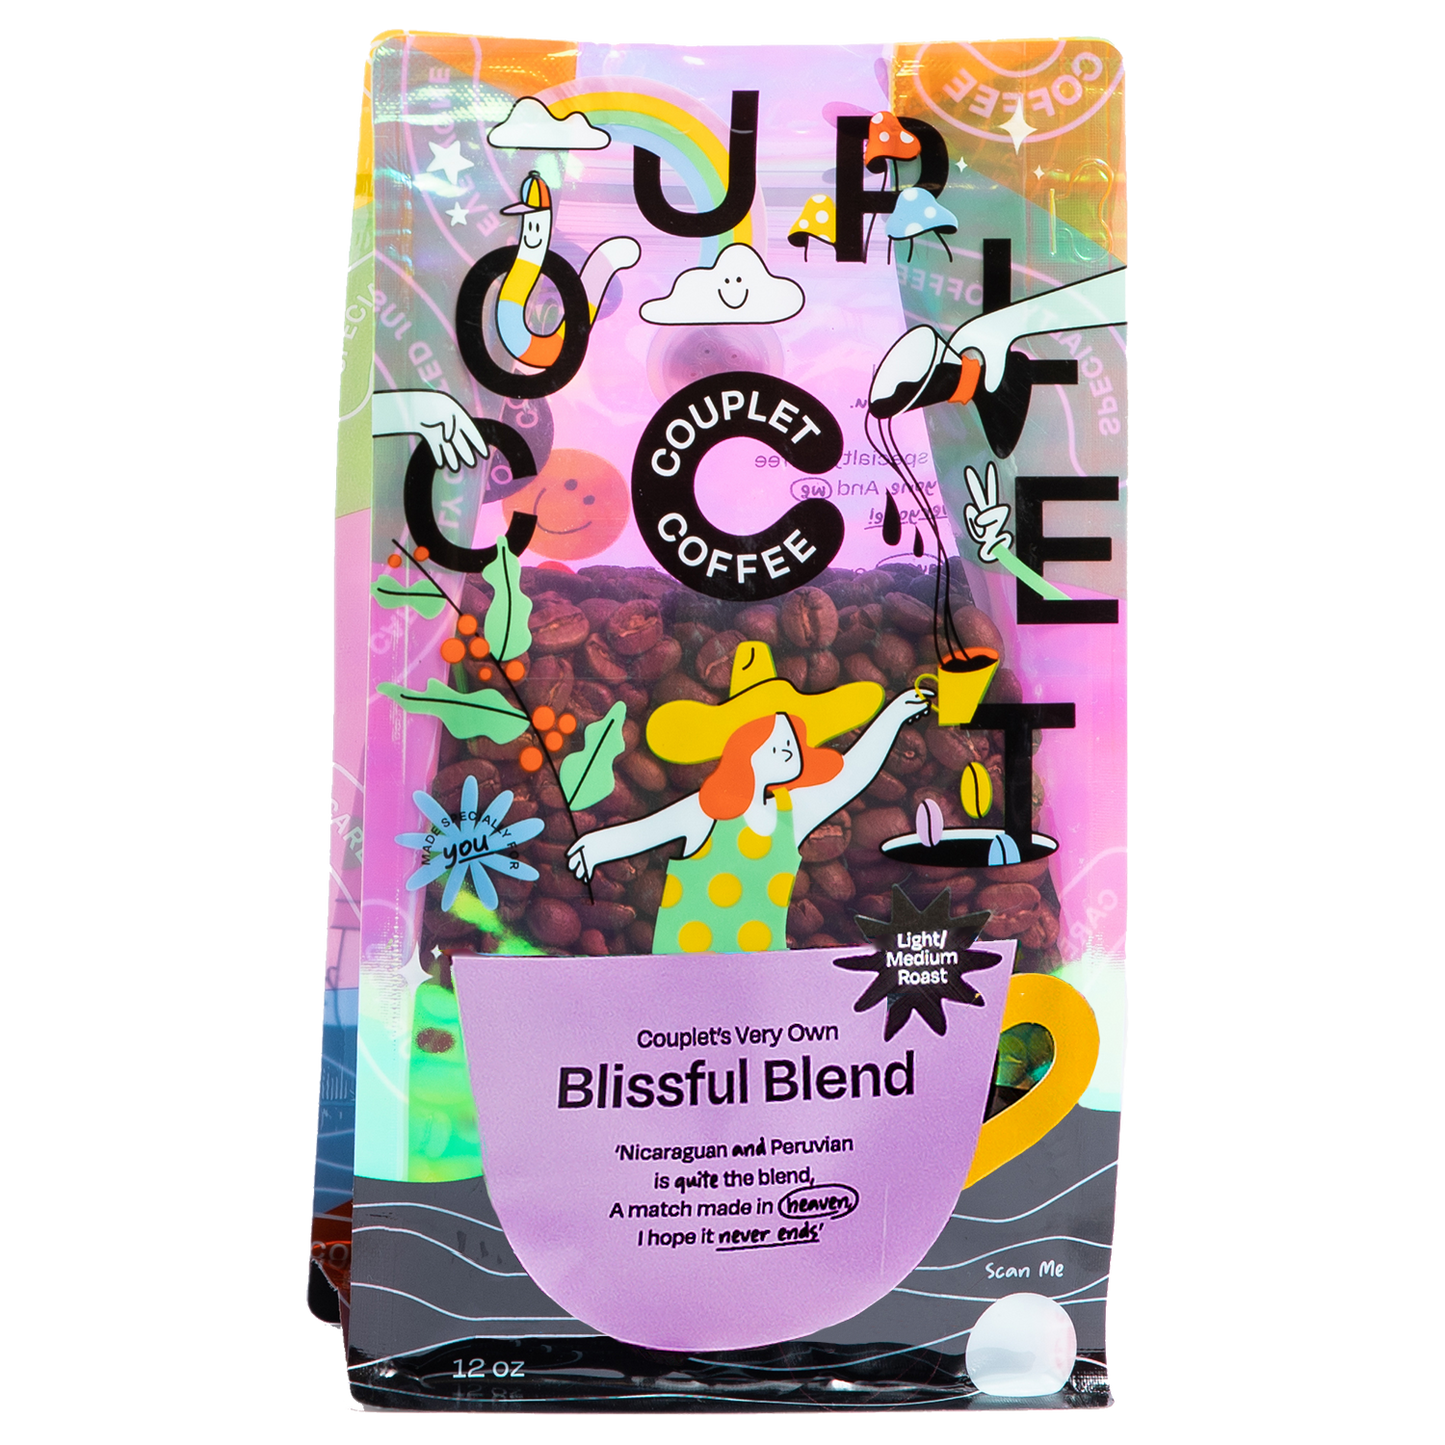 The Blissful Blend